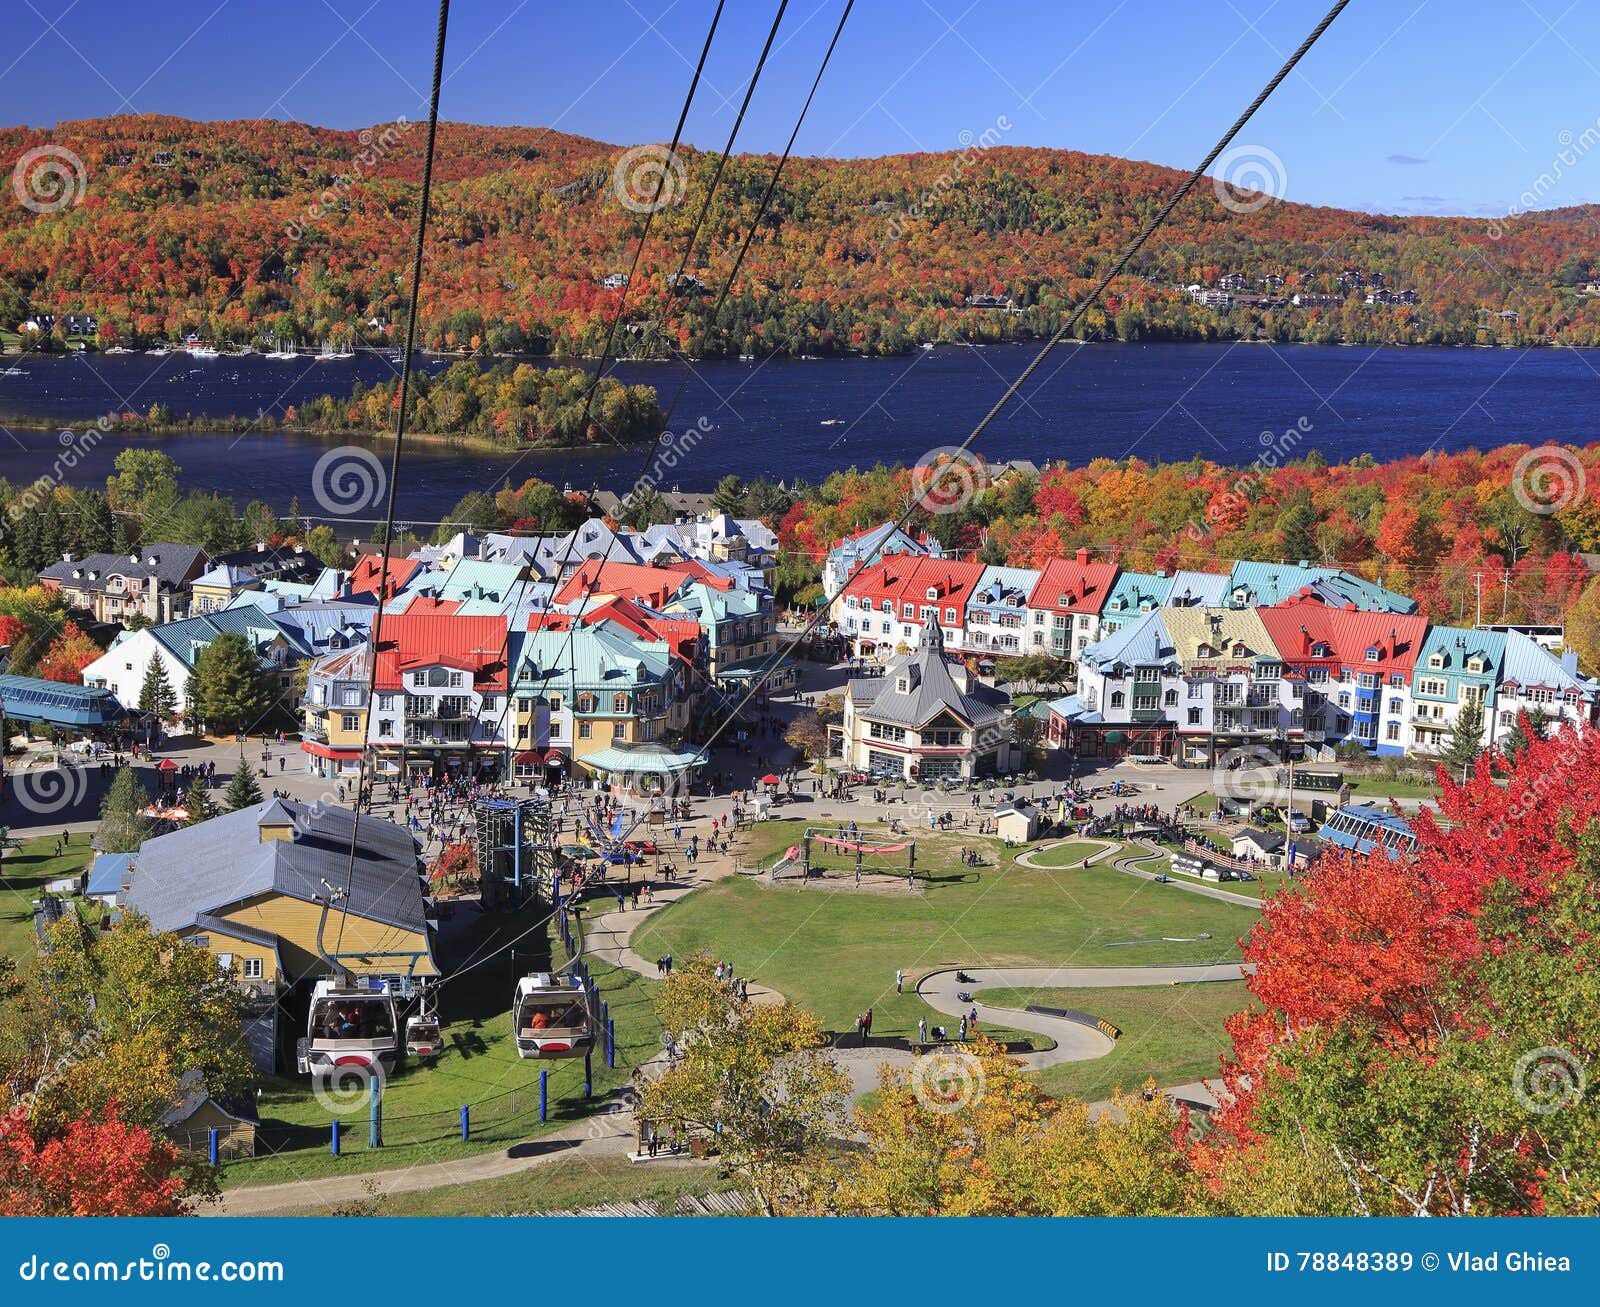 mont tremblant funicular and lake in autumn, quebec